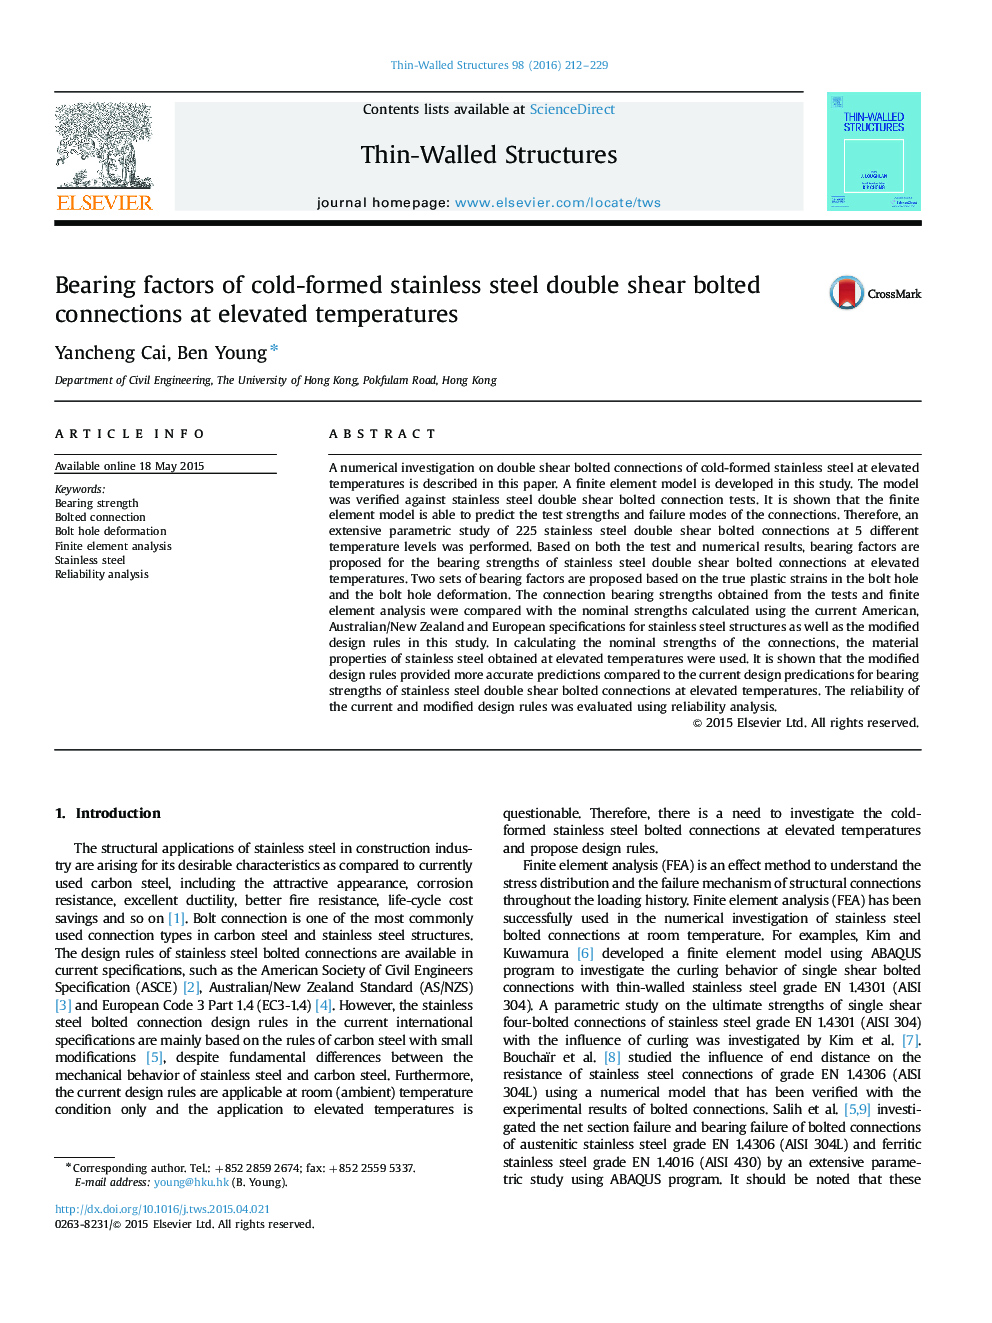 Bearing factors of cold-formed stainless steel double shear bolted connections at elevated temperatures